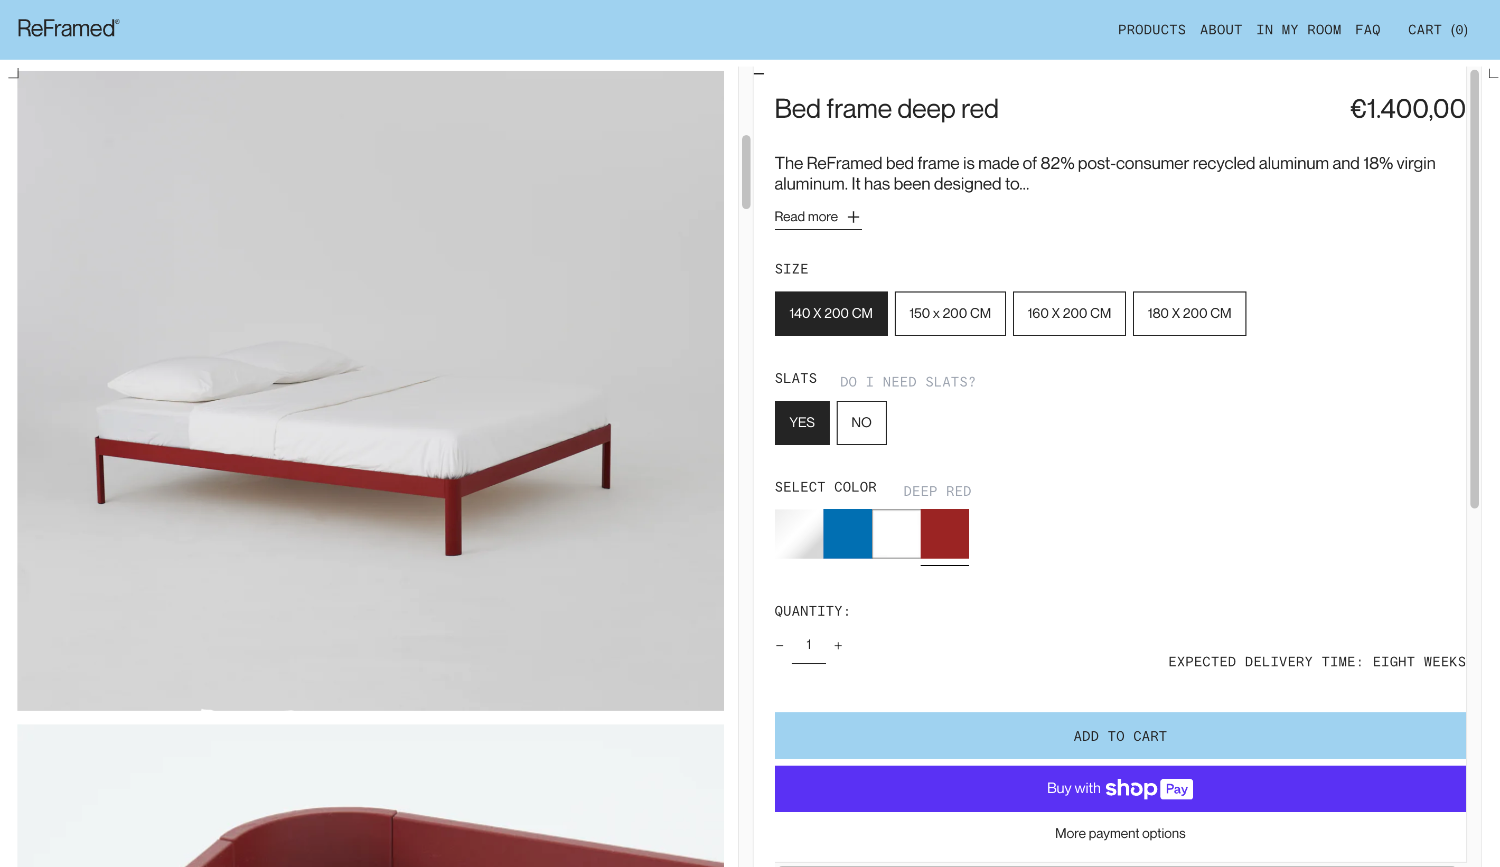 A product page for a product on the brand Reframed's ecommerce website